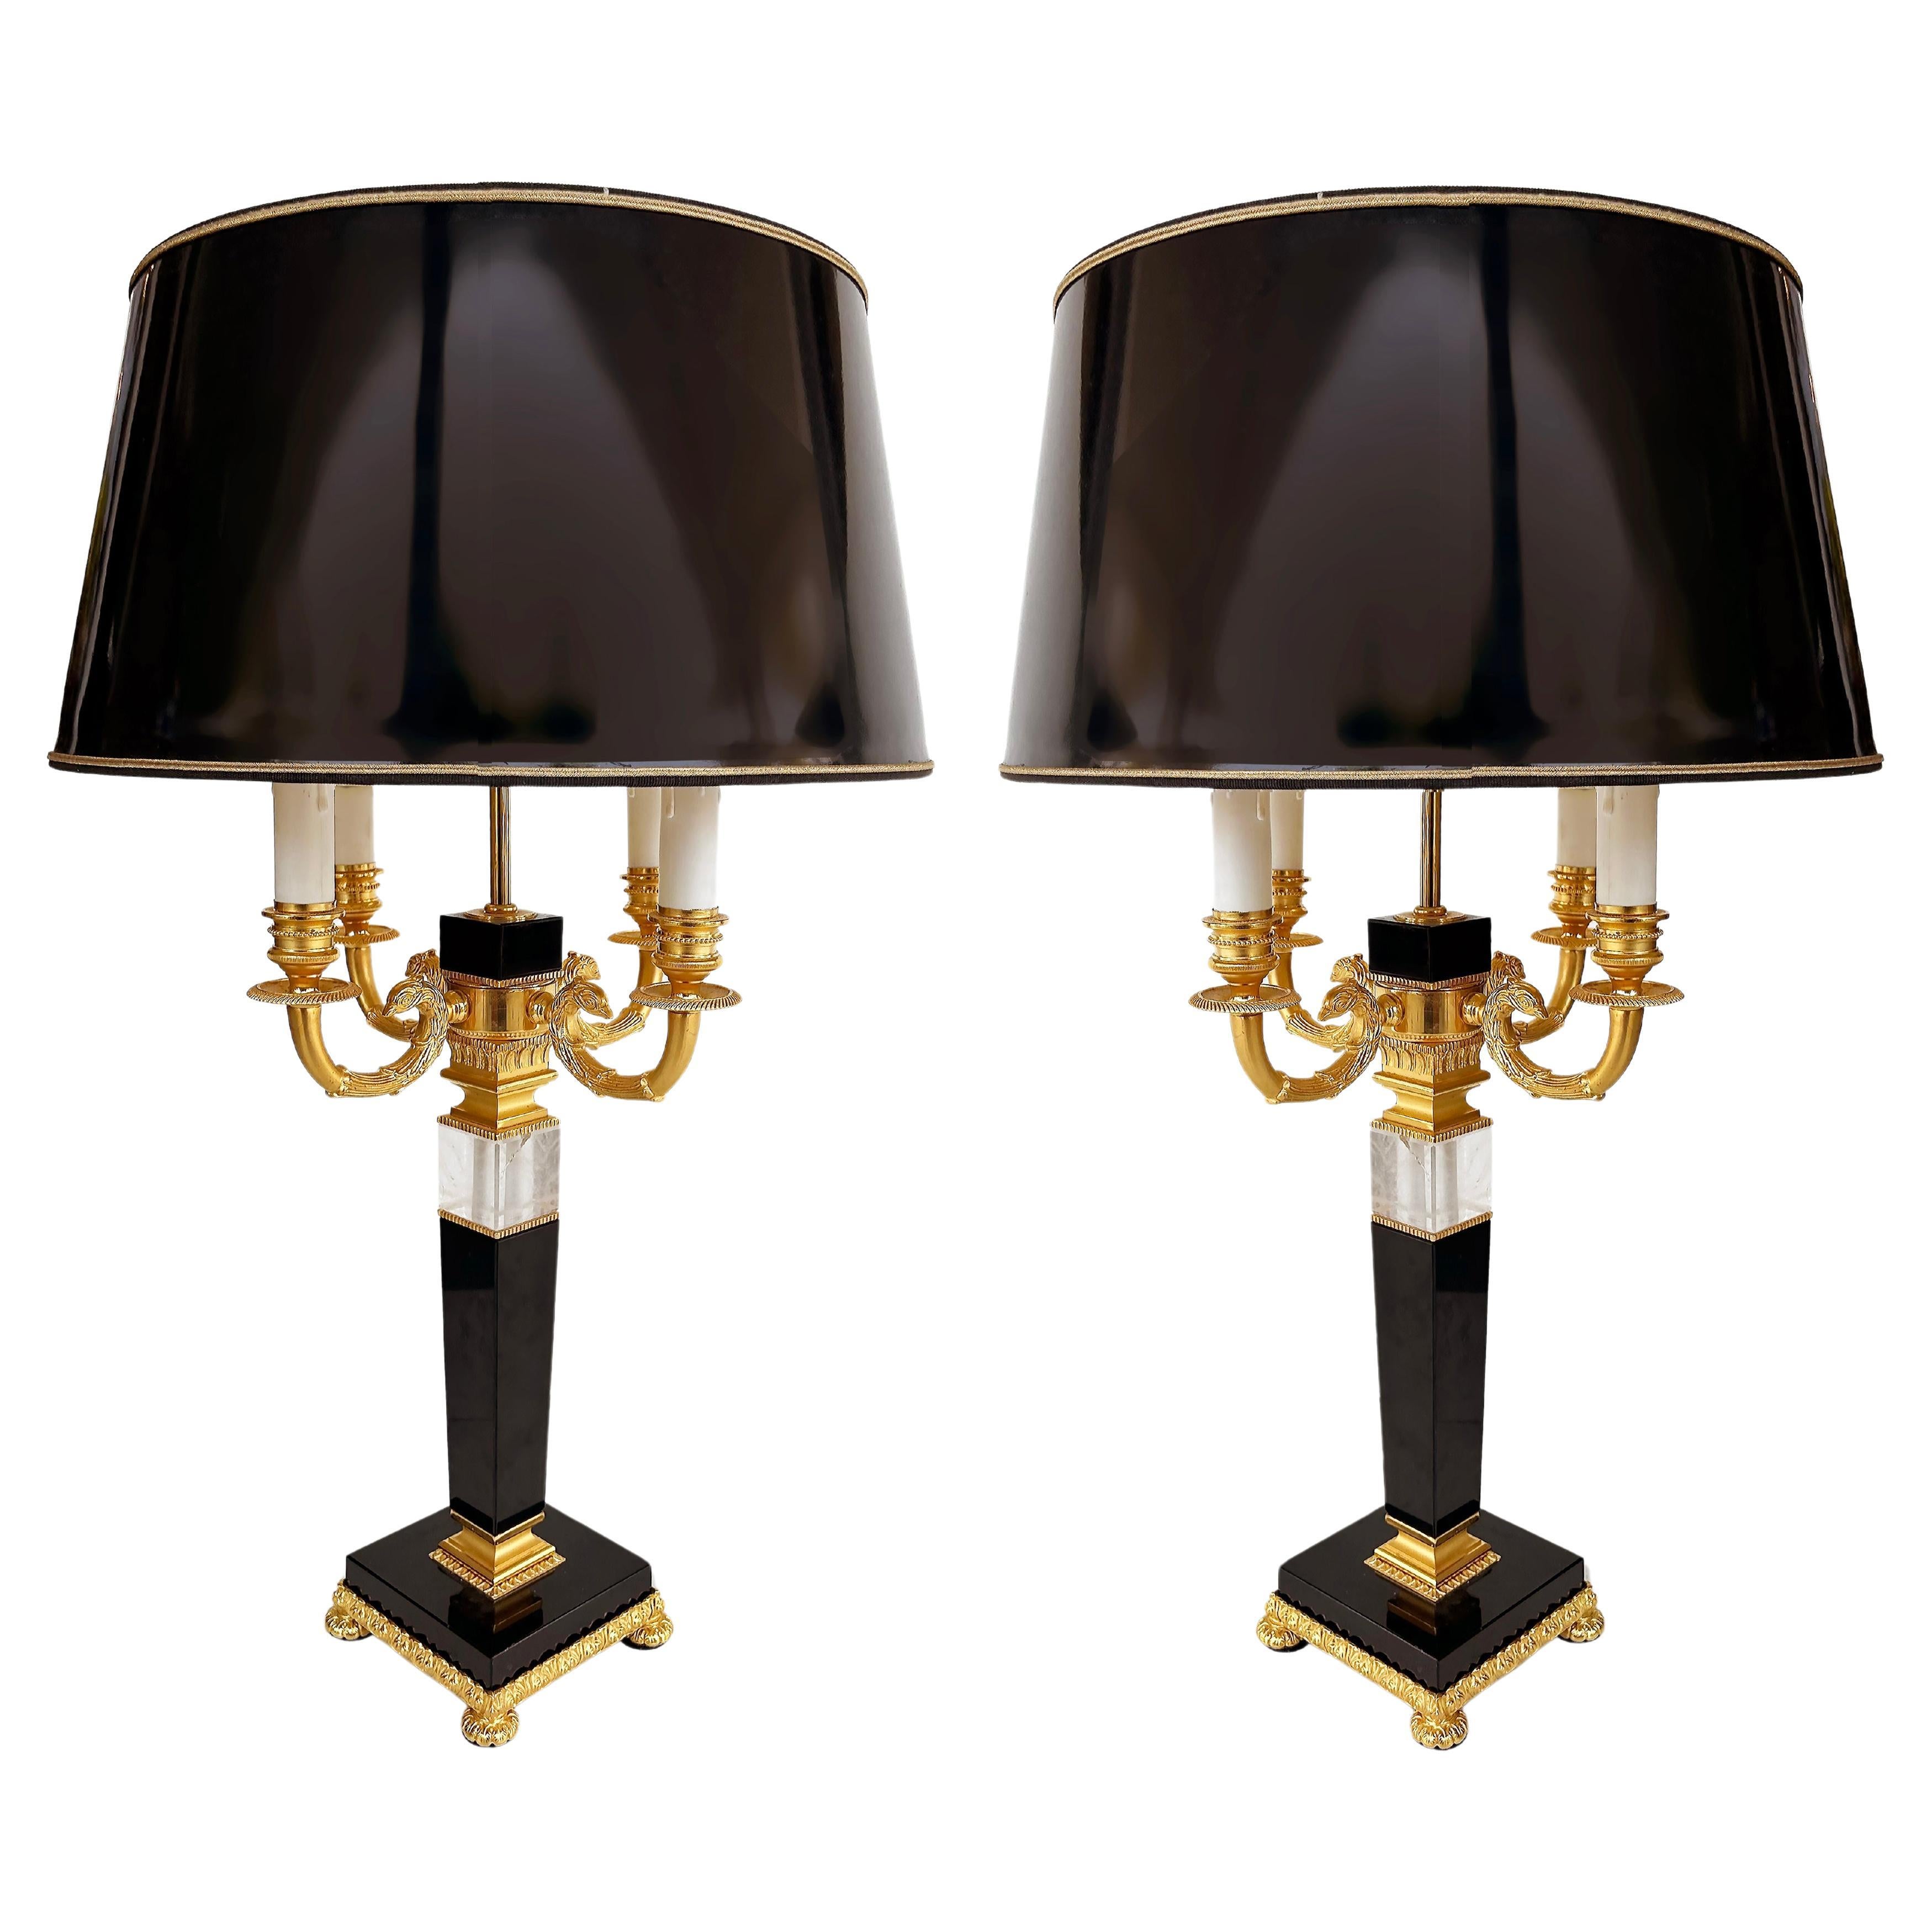 Laudarte SRL Italian Gilt Bronze Rock Crystal Marble Lamps, Micro-Infused Gold 